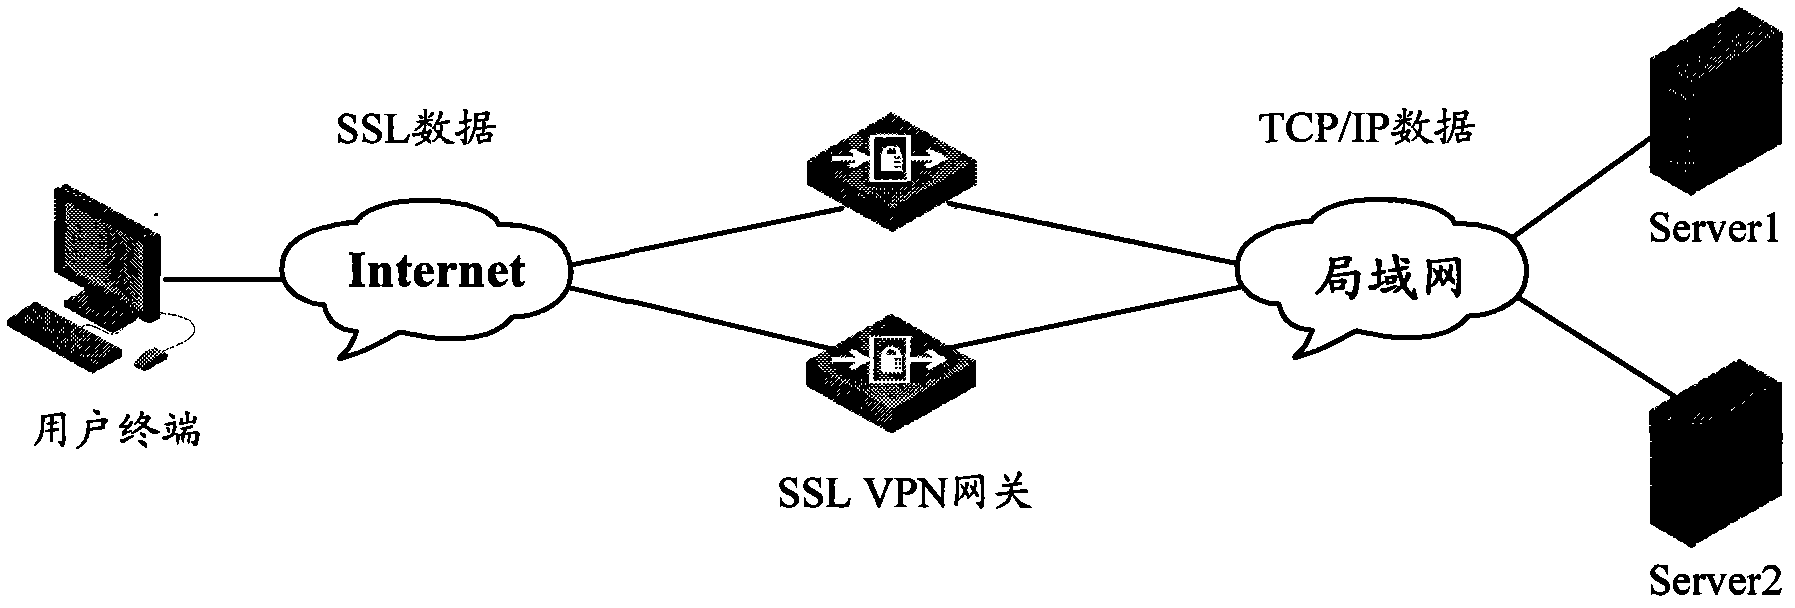 User access method and device based on SSL (Secure Socket Layer) VPN (Virtual Private Network) gateway cluster